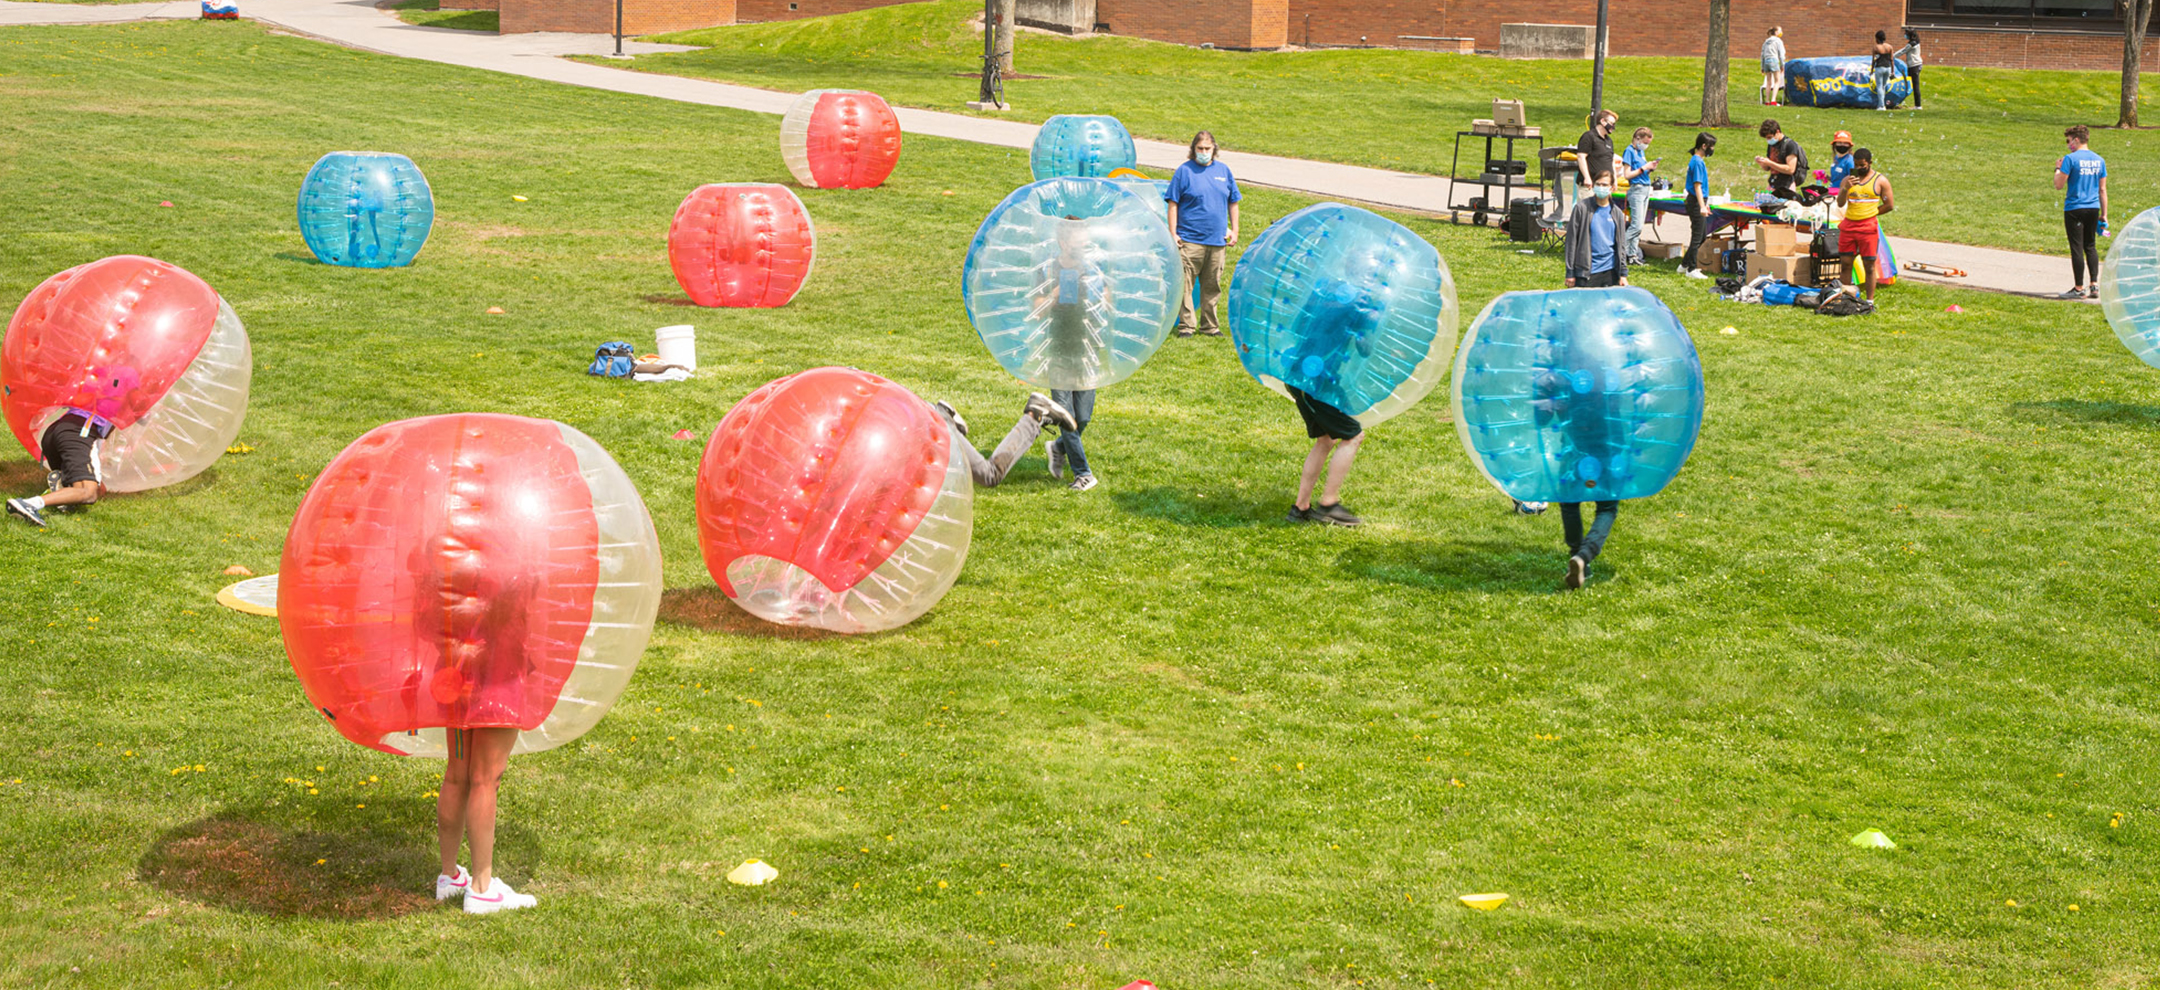 A game of bubble ball